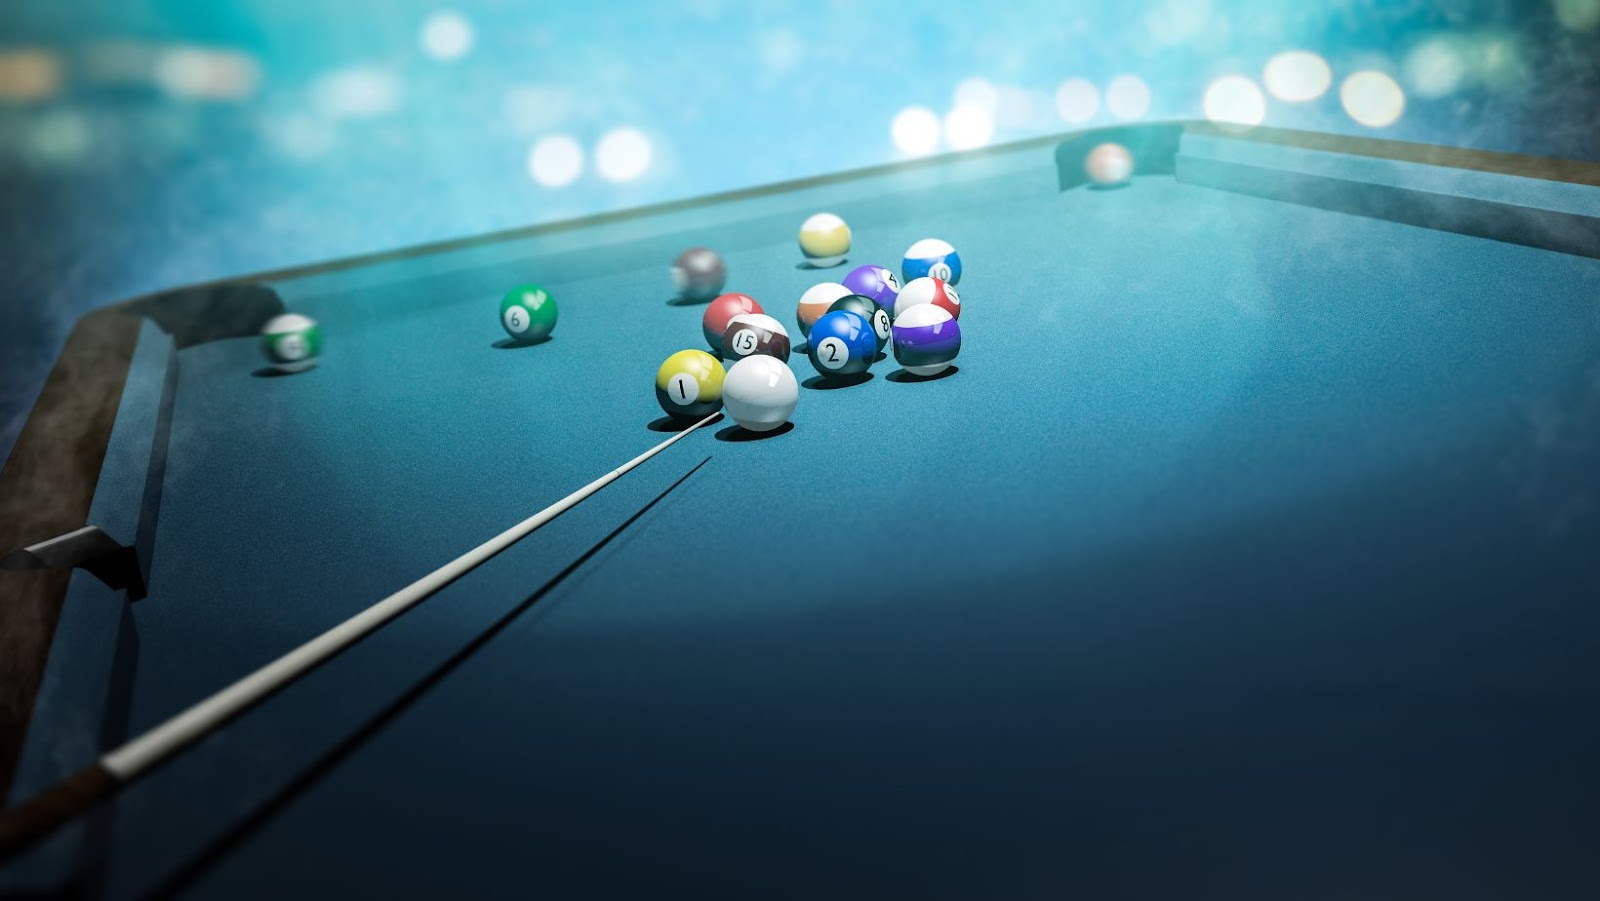 Tips And Tricks For Playing Billiards, Pool, And Snooker